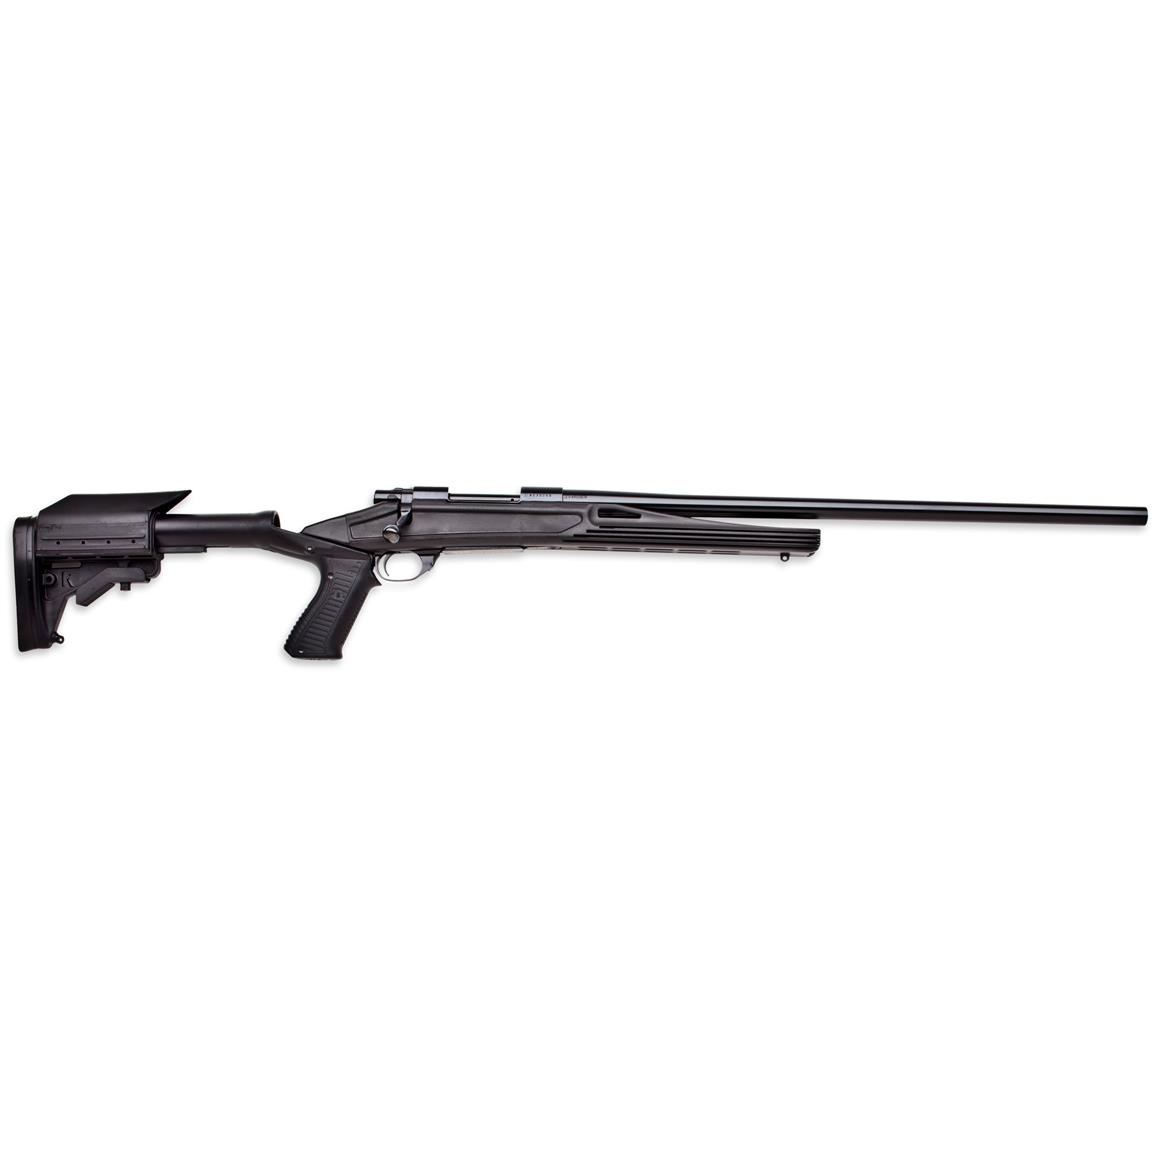 LSI Howa Axiom, Bolt Action, .243 Winchester, 24" Barrel, 5+1 Rounds